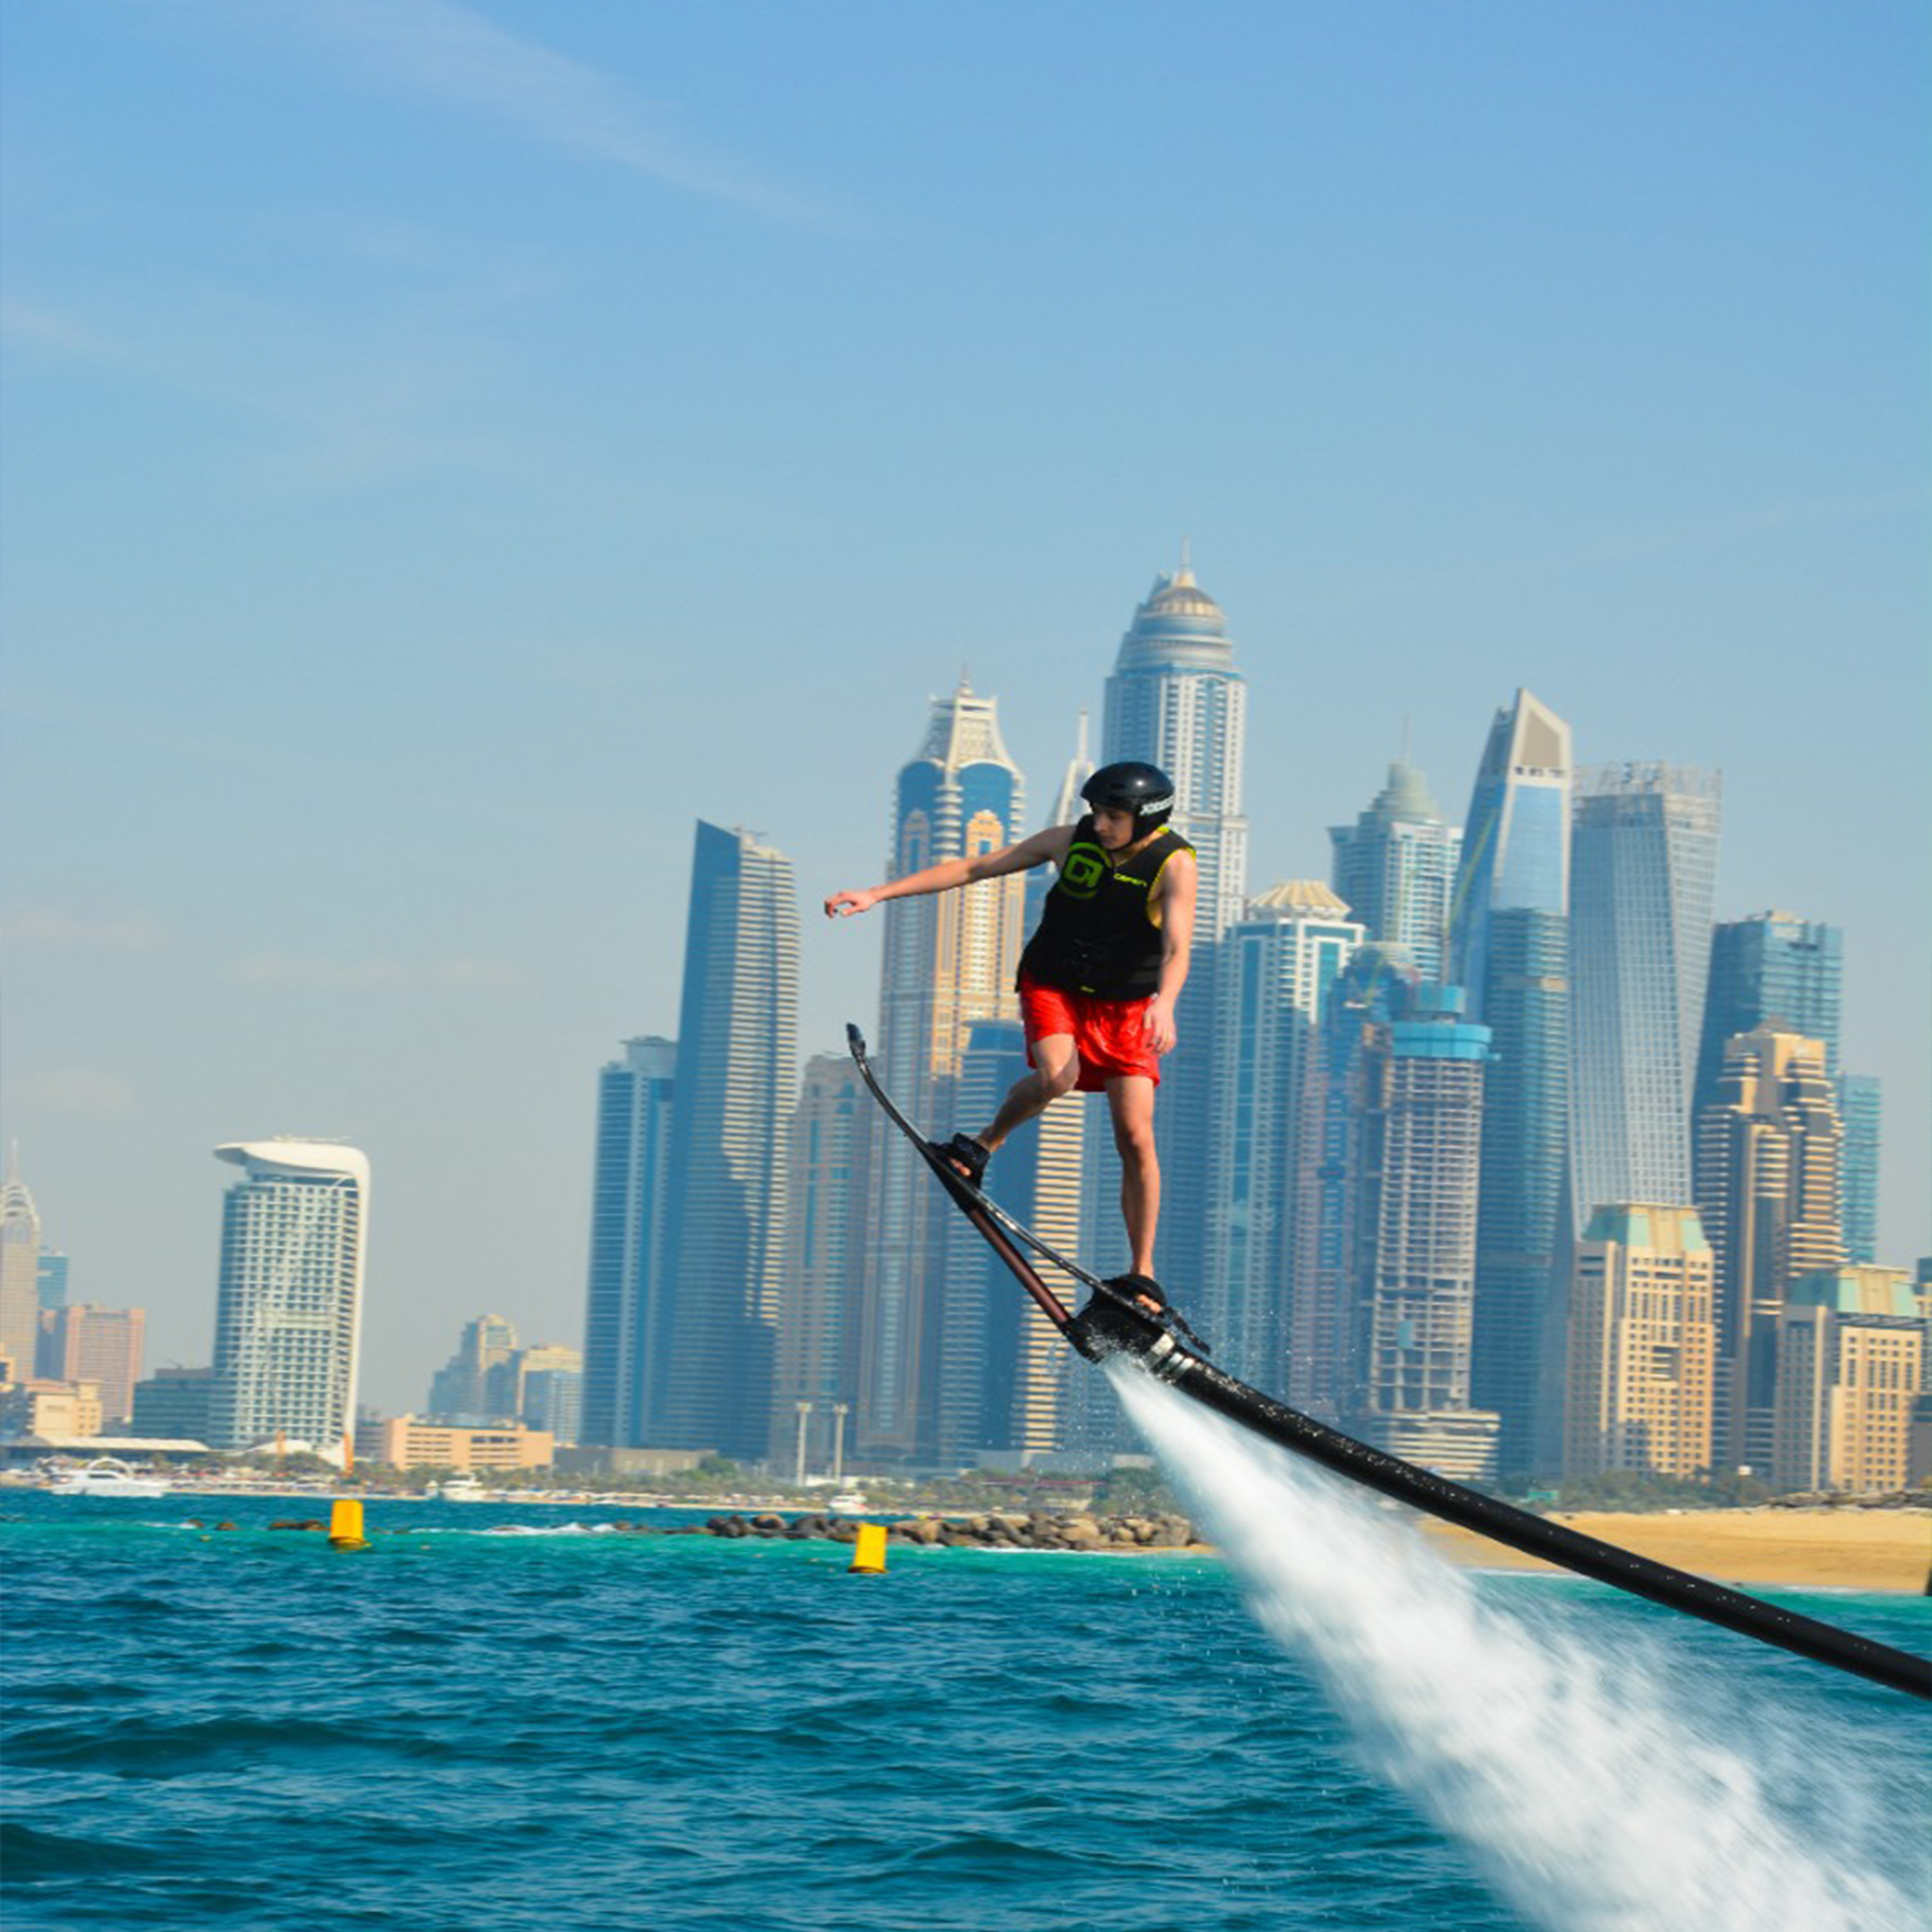 Water sports in Dubai: Where to go and what to do